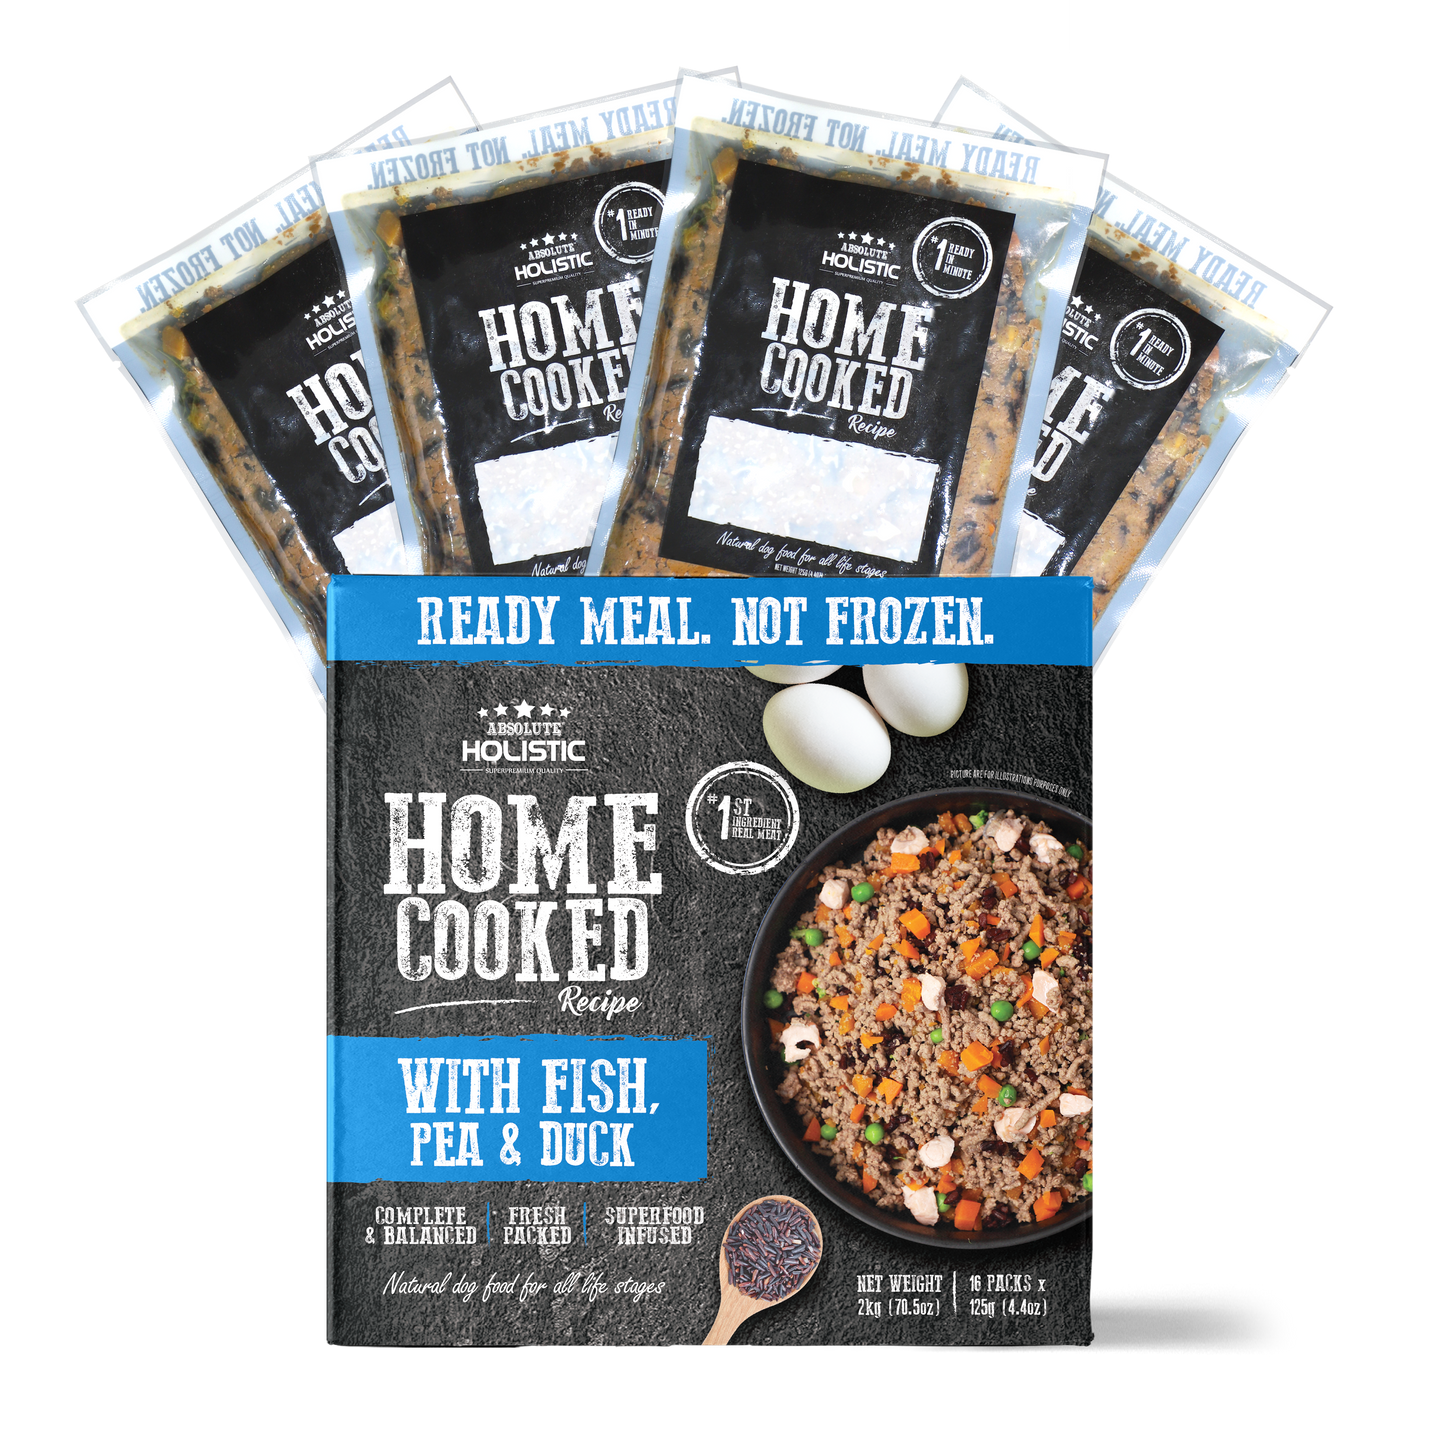 Absolute Holistic Home Cooked Style Recipe Fish, Peas & Duck Gently Cooked Dog Food